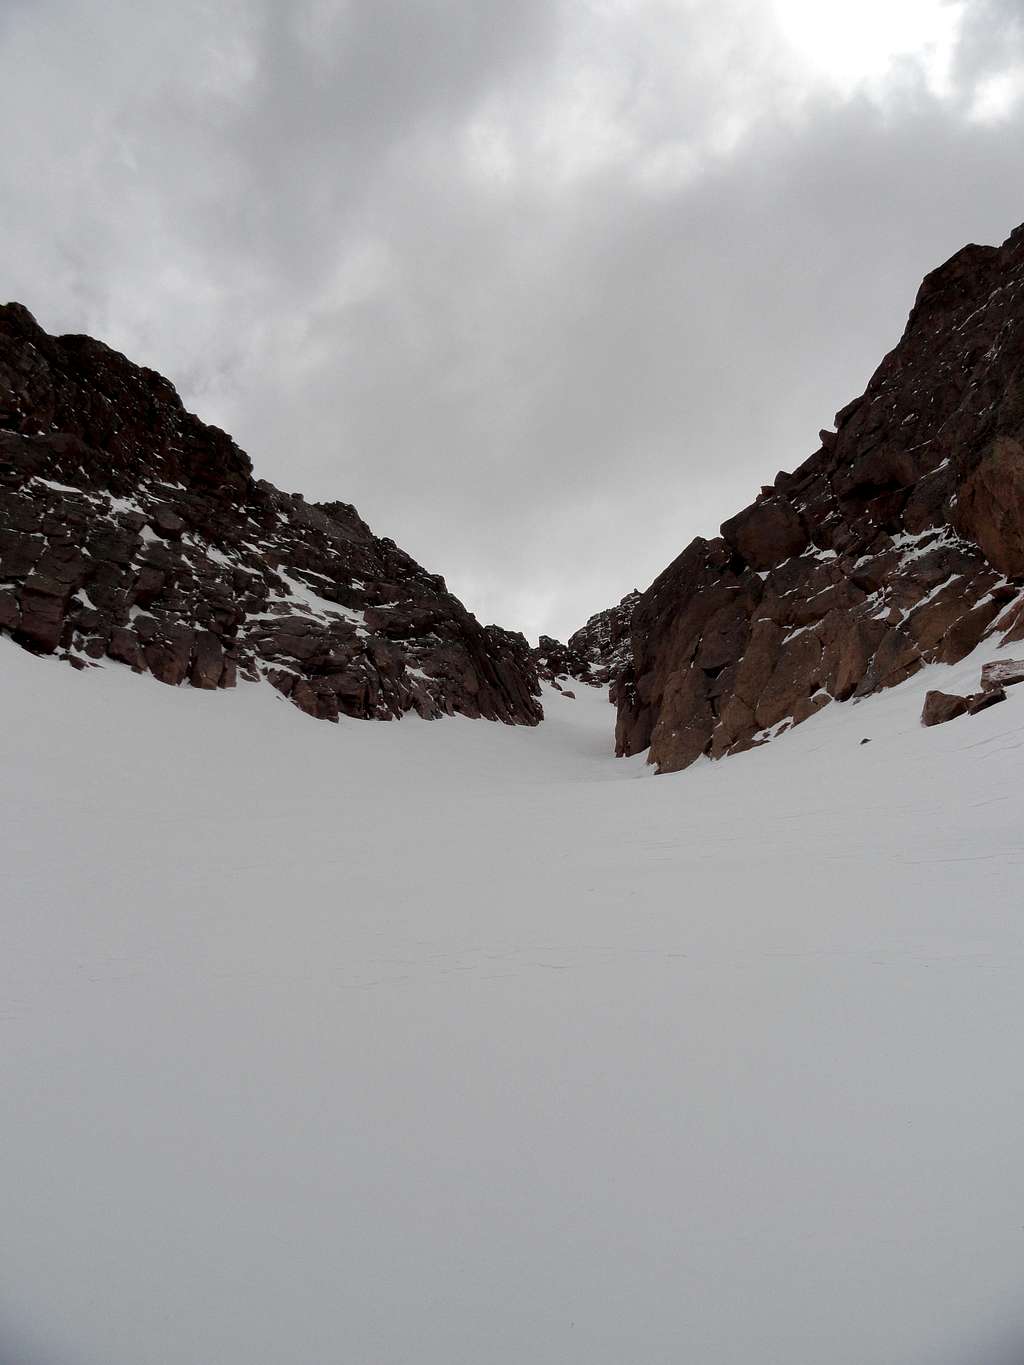 The Y Couloir